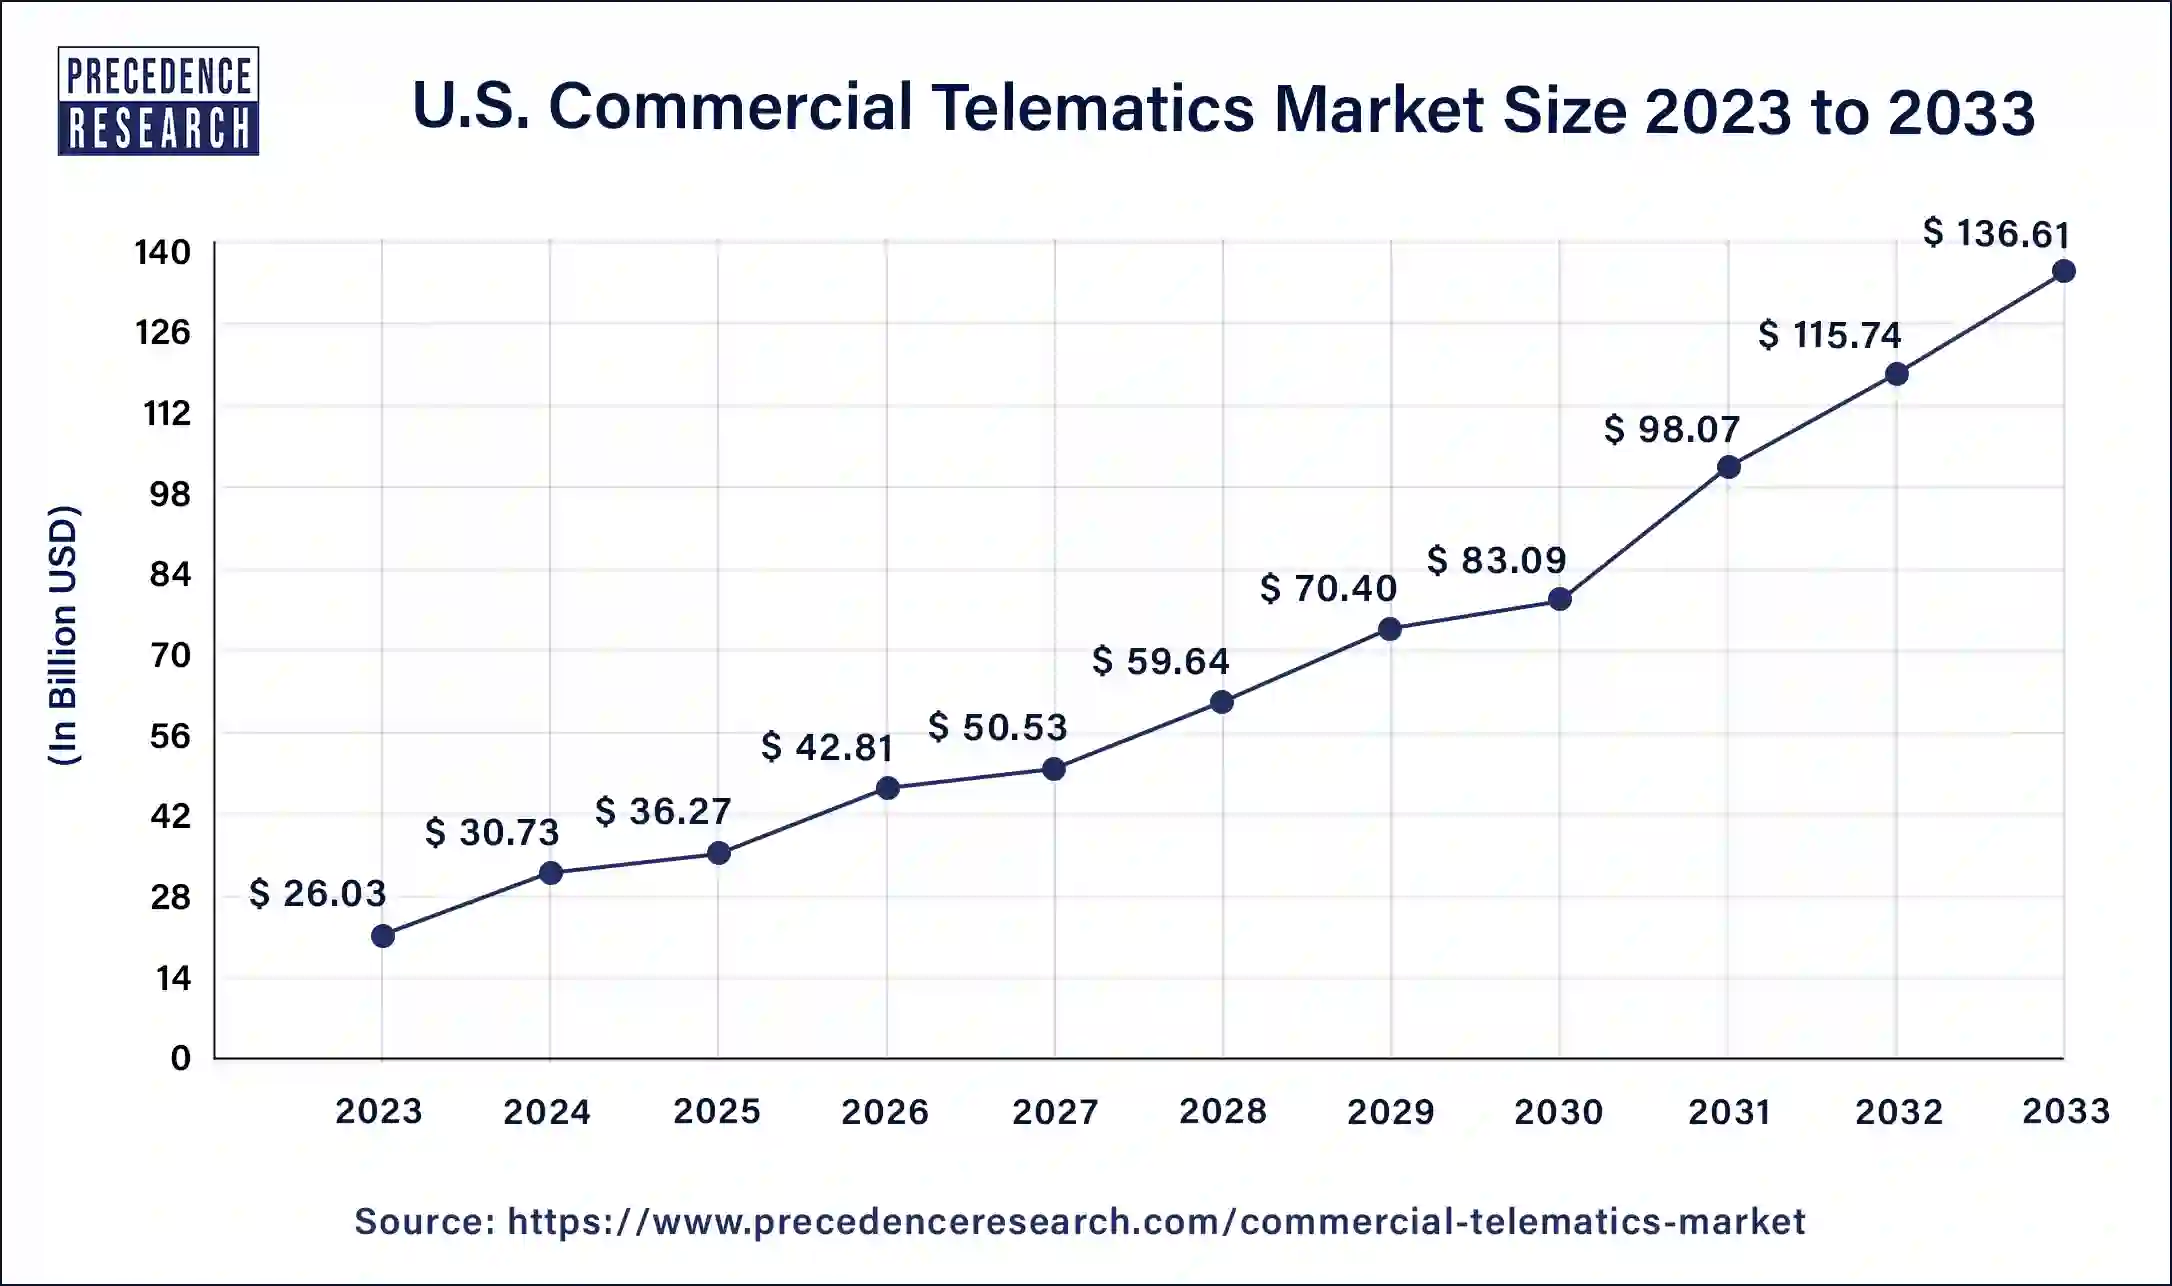 U.S. Commercial Telematics Market Size 2024 to 2033